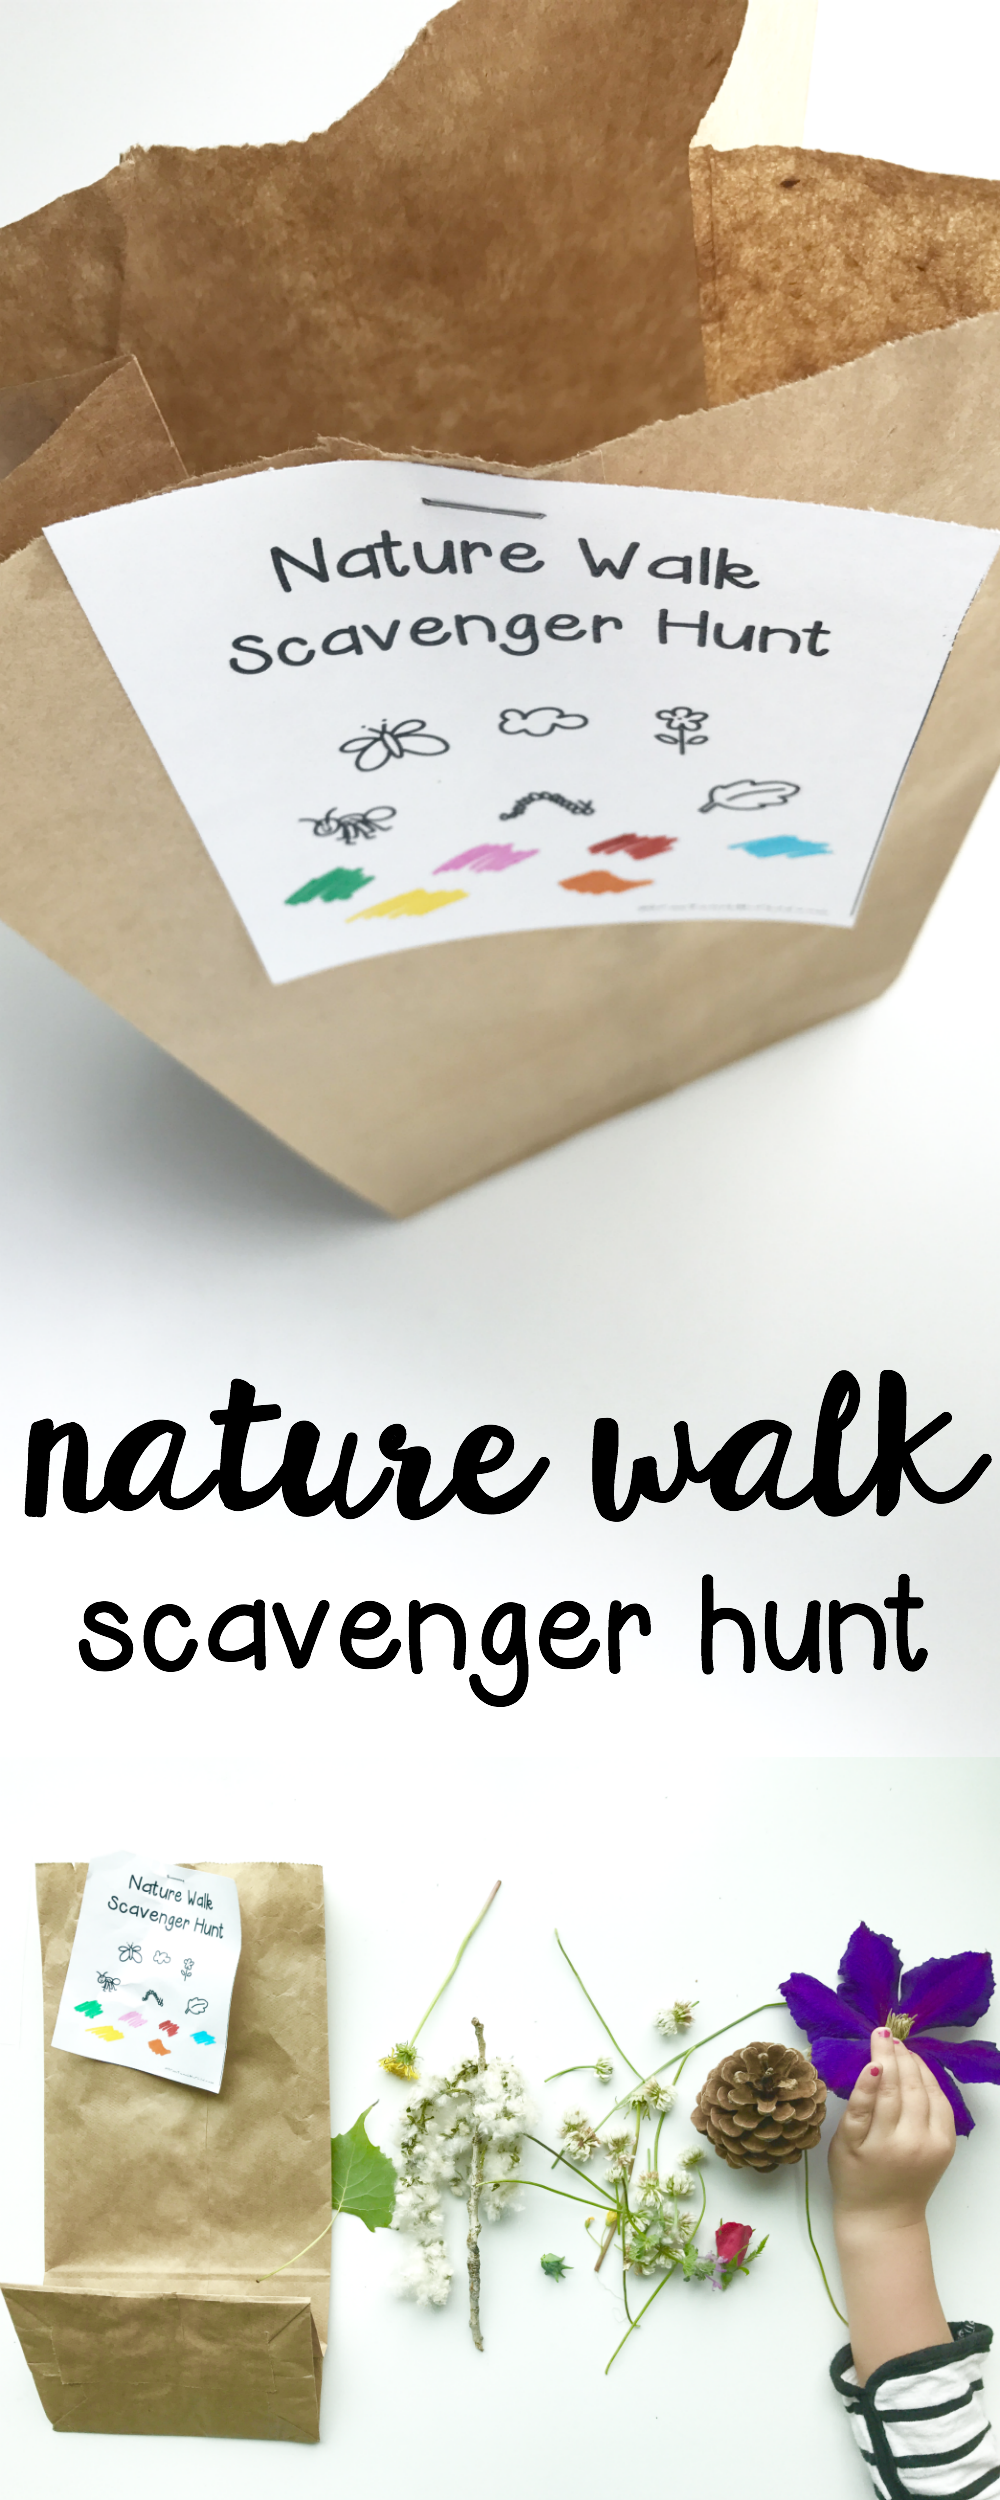 Nature Walk Scavenger Hunt:  Such a fun outdoor activity for toddlers and preschoolers!